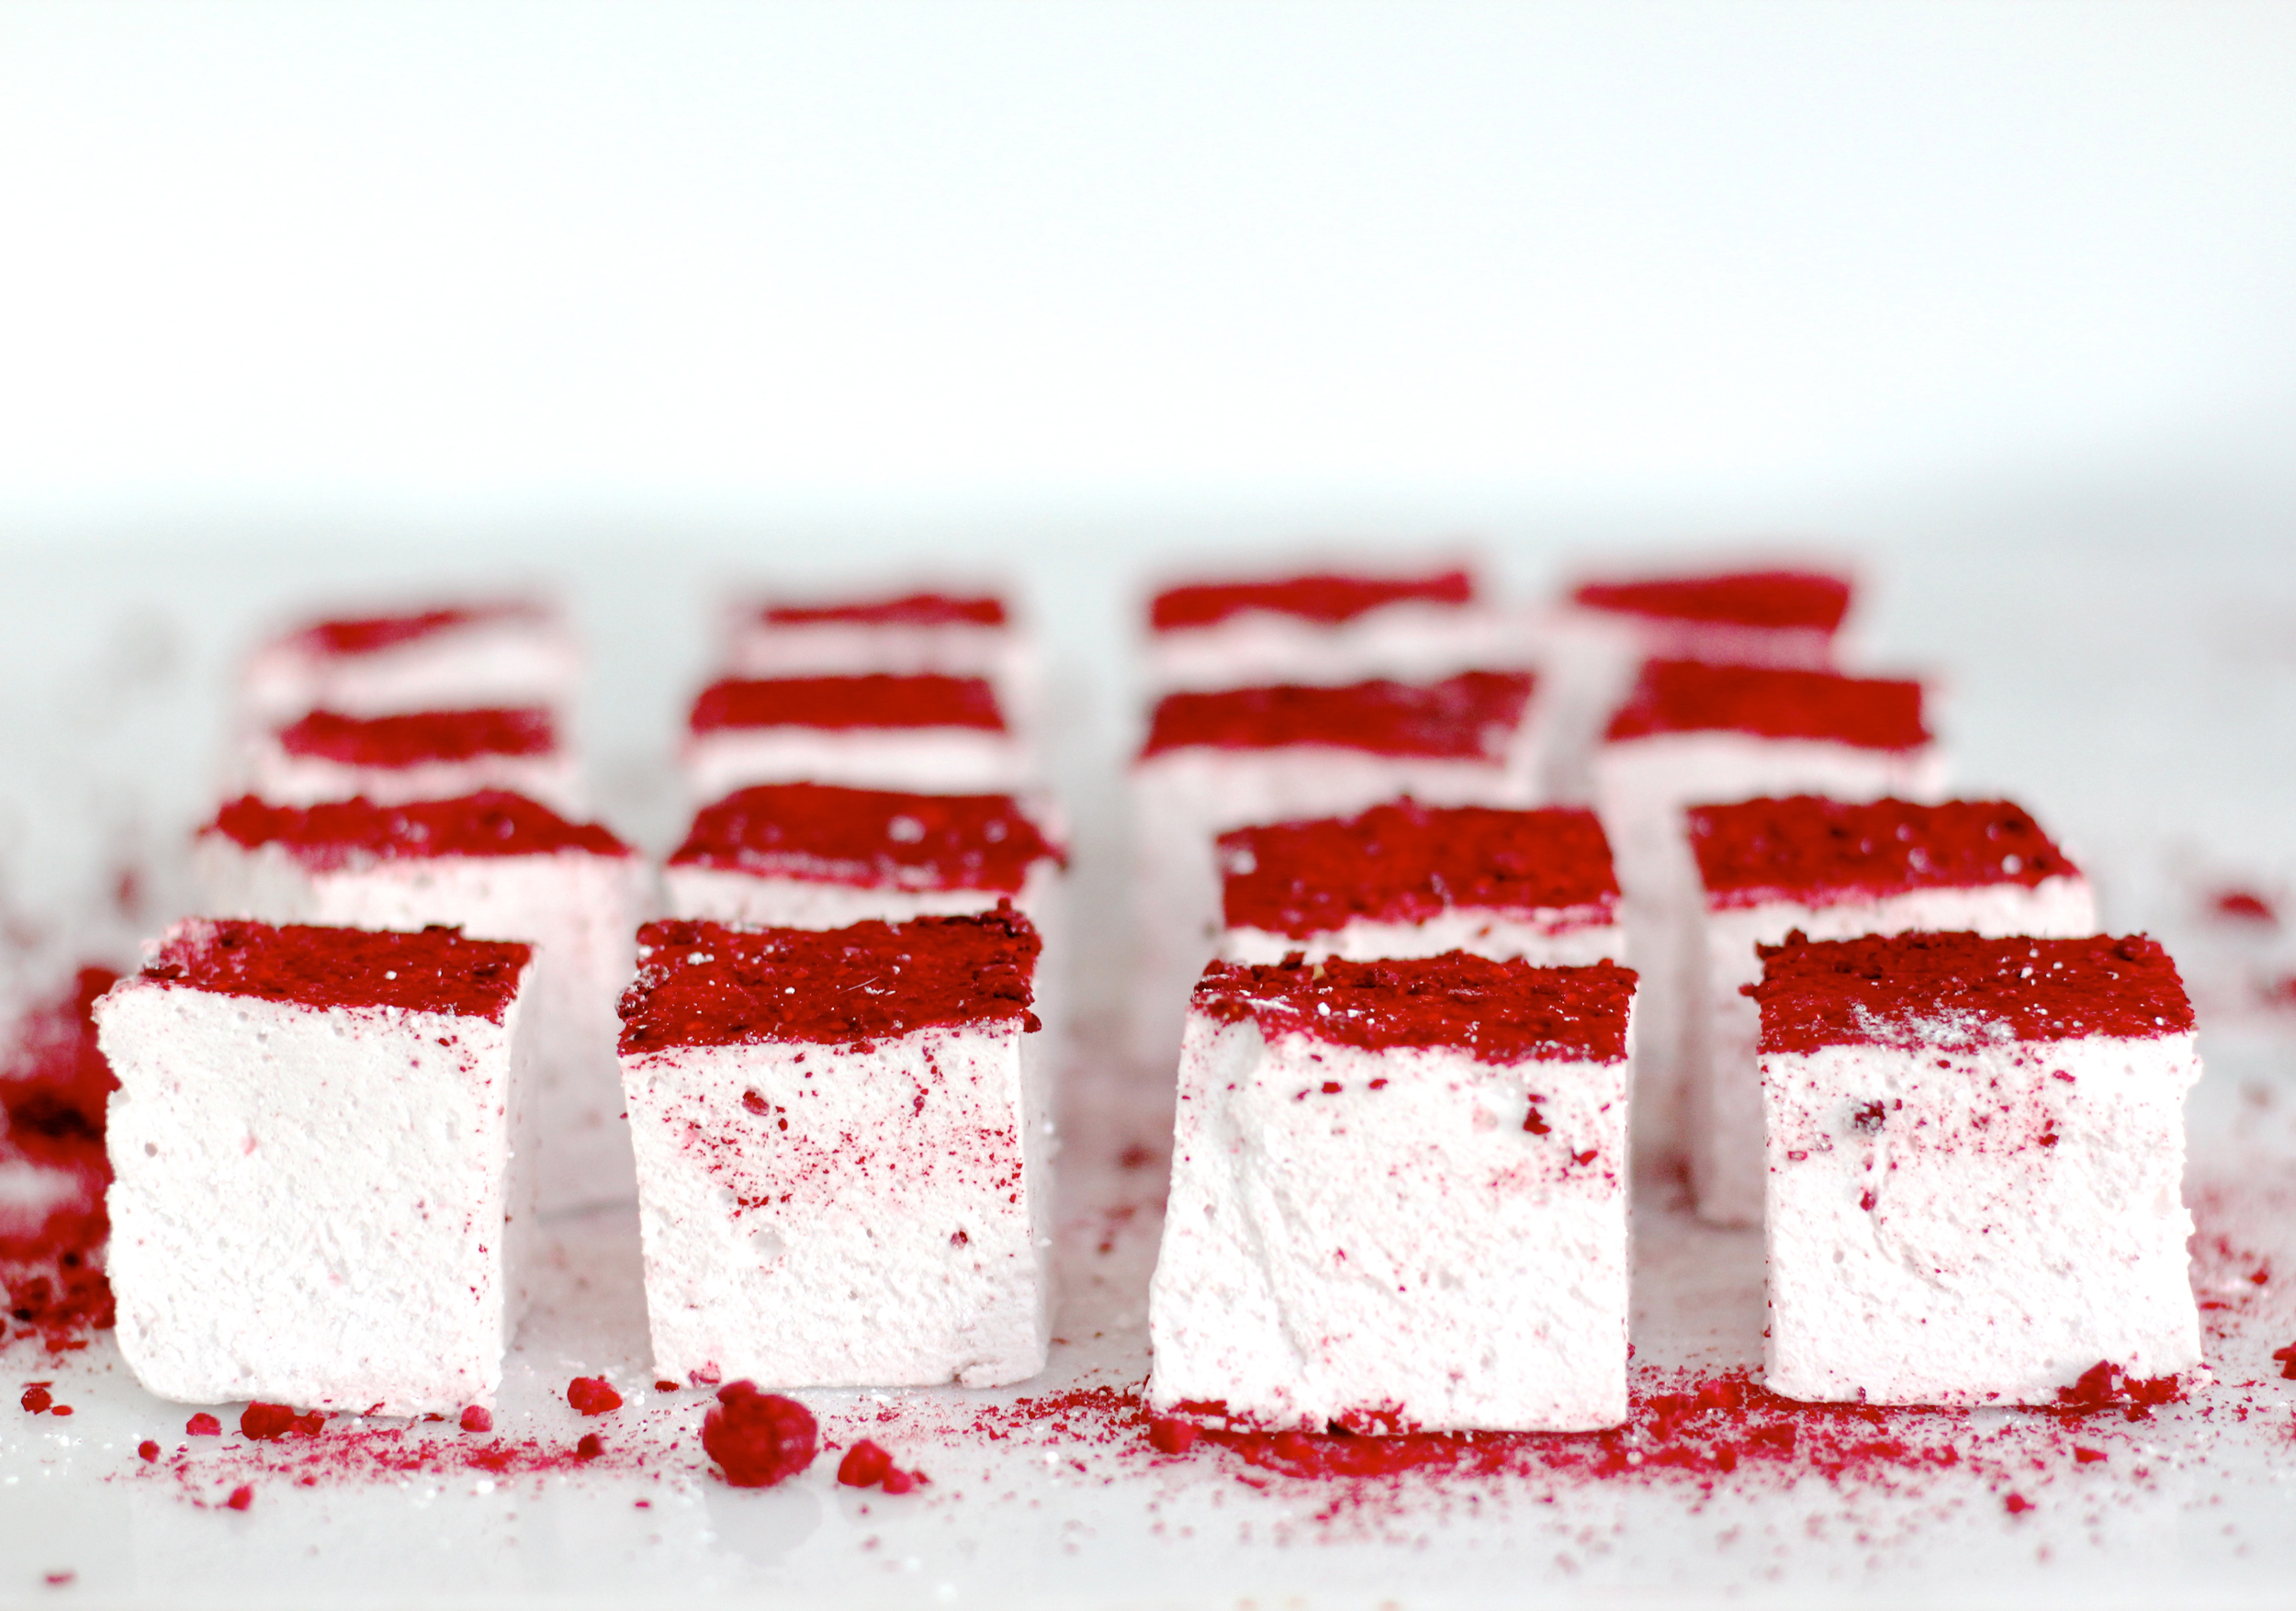 How to make fluffy homemade raspberry marshmallows (perfect for Valentine's Day!) Click through for the recipe. | glitterinc.com | @glitterinc